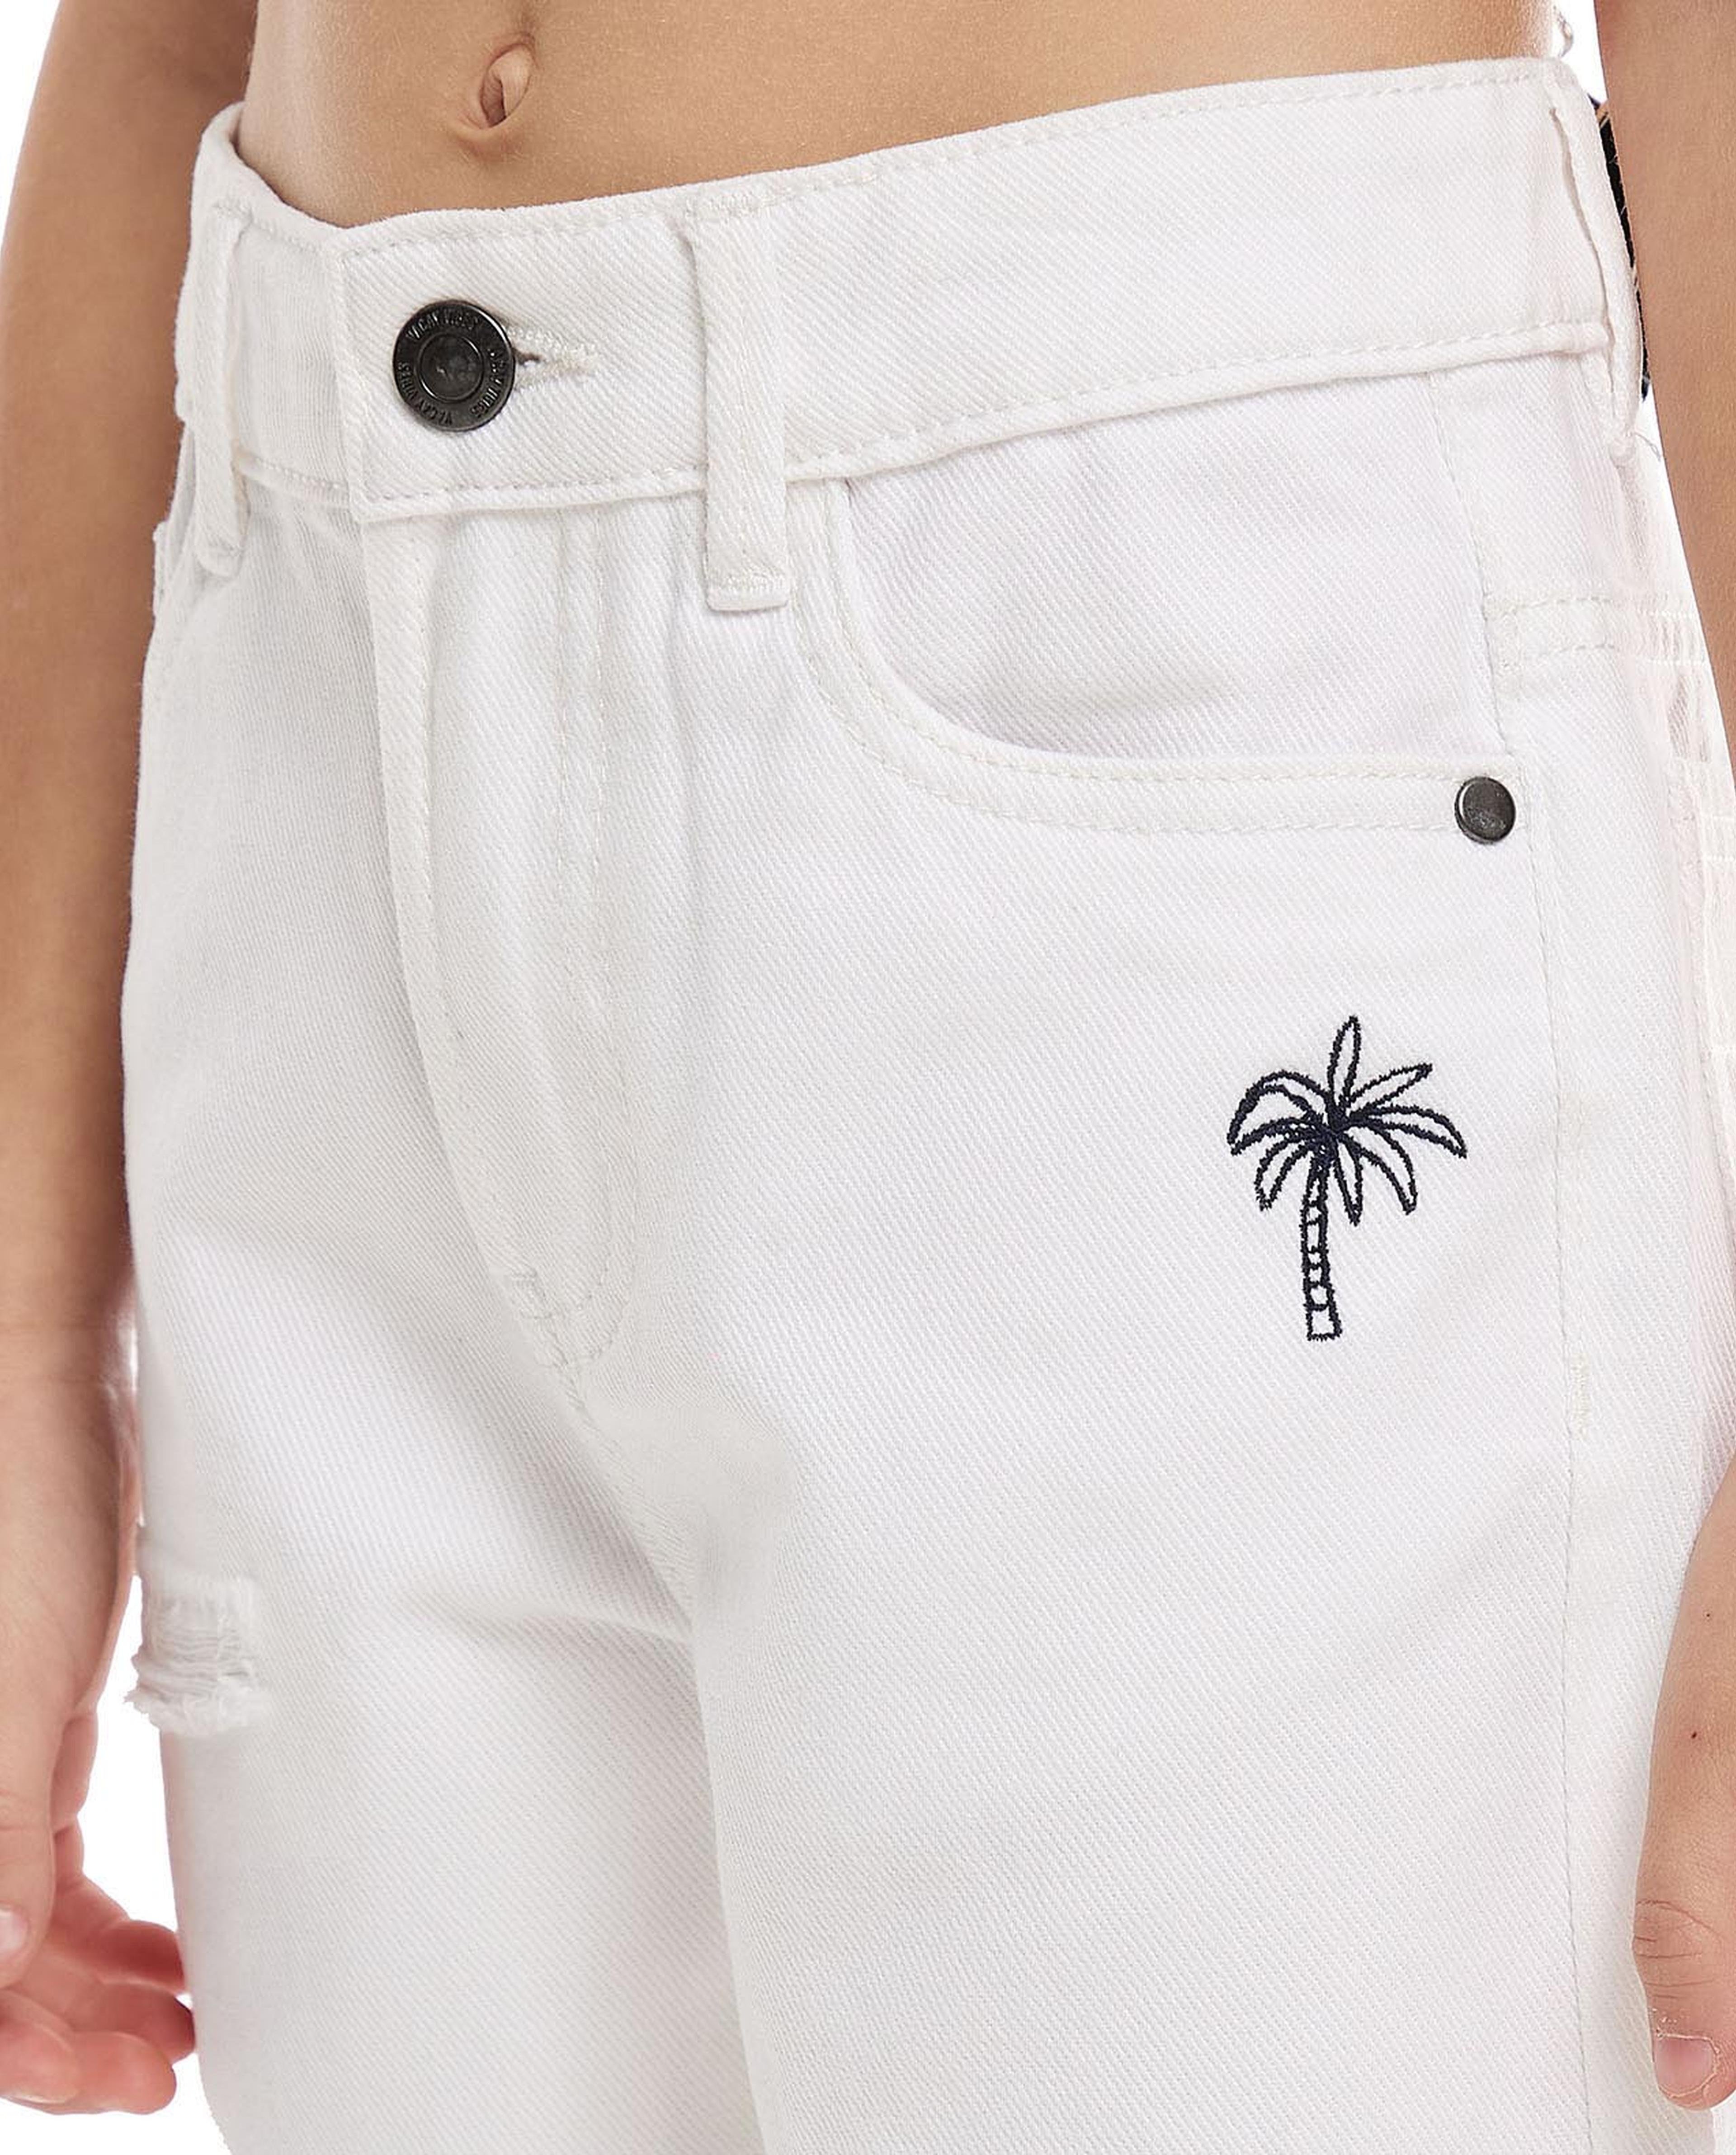 Embroidery Detail Shorts with Button Closure